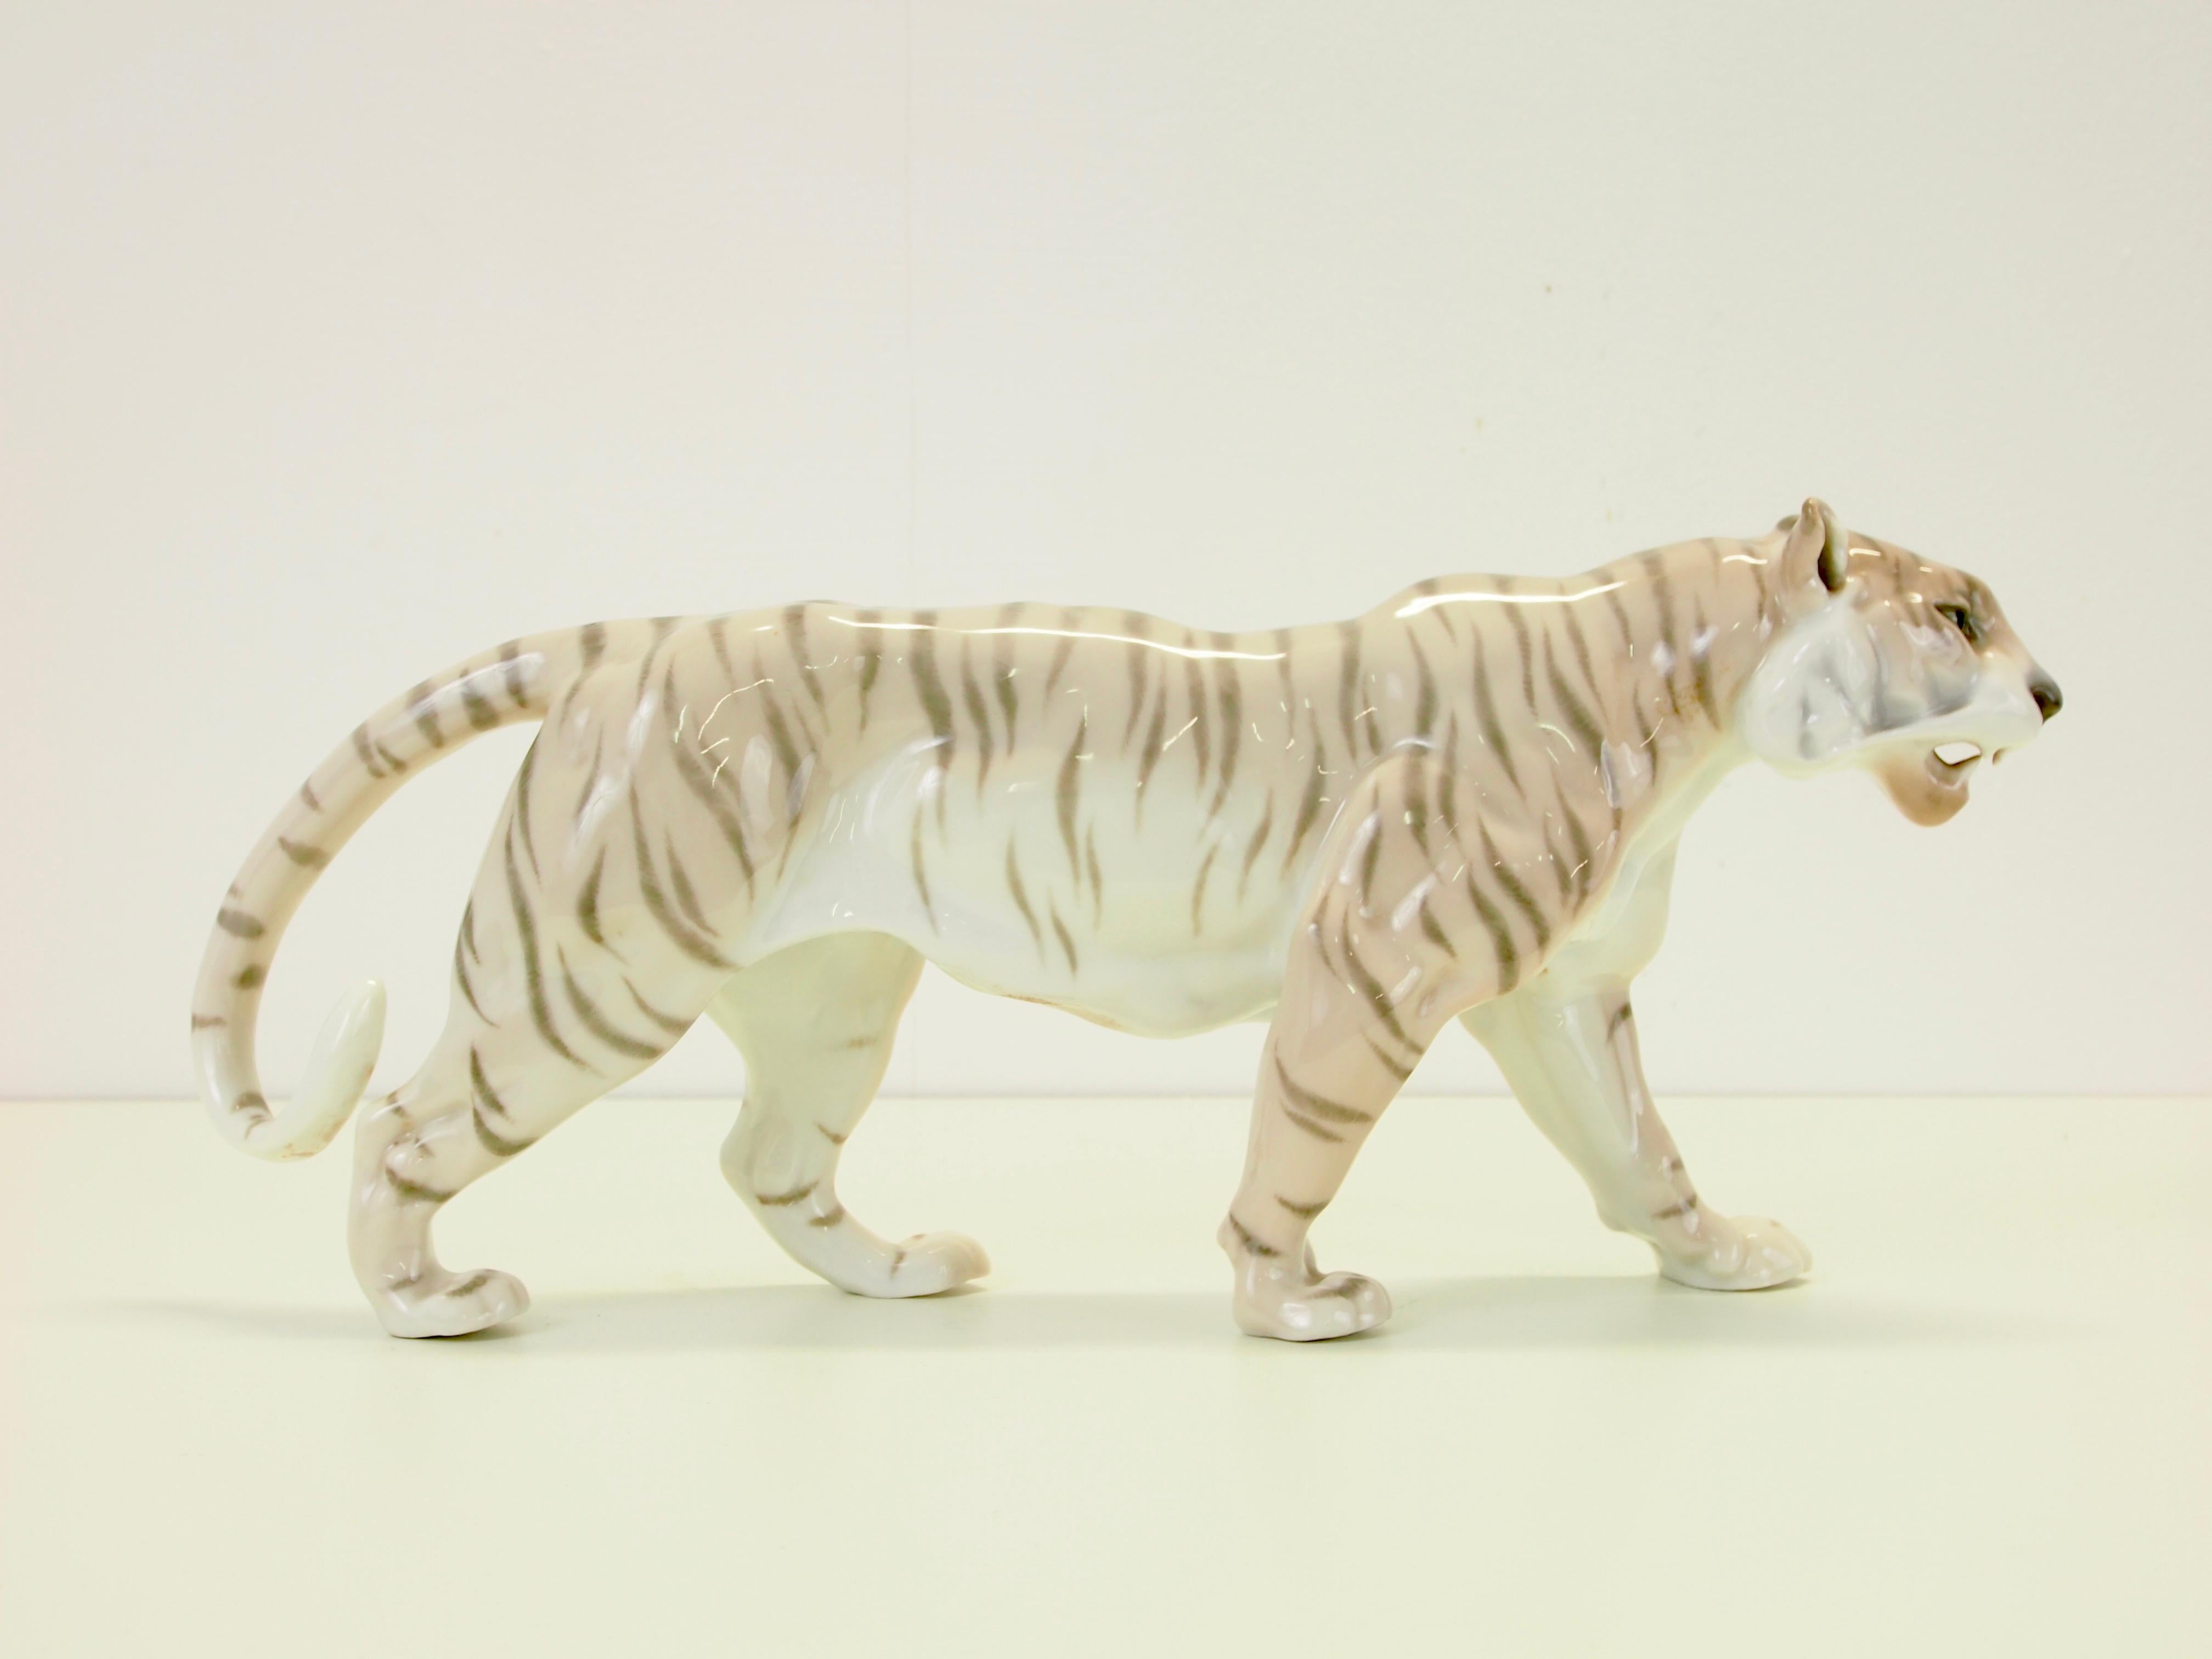 Midcentury porcelain German tiger figurine attributed to Theodor Karner or Willy Zugel for Rosenthal.

This figurine is a really high end porcelain piece d'art with very fine details and a beautiful soft tone decoration.

The measurements are H